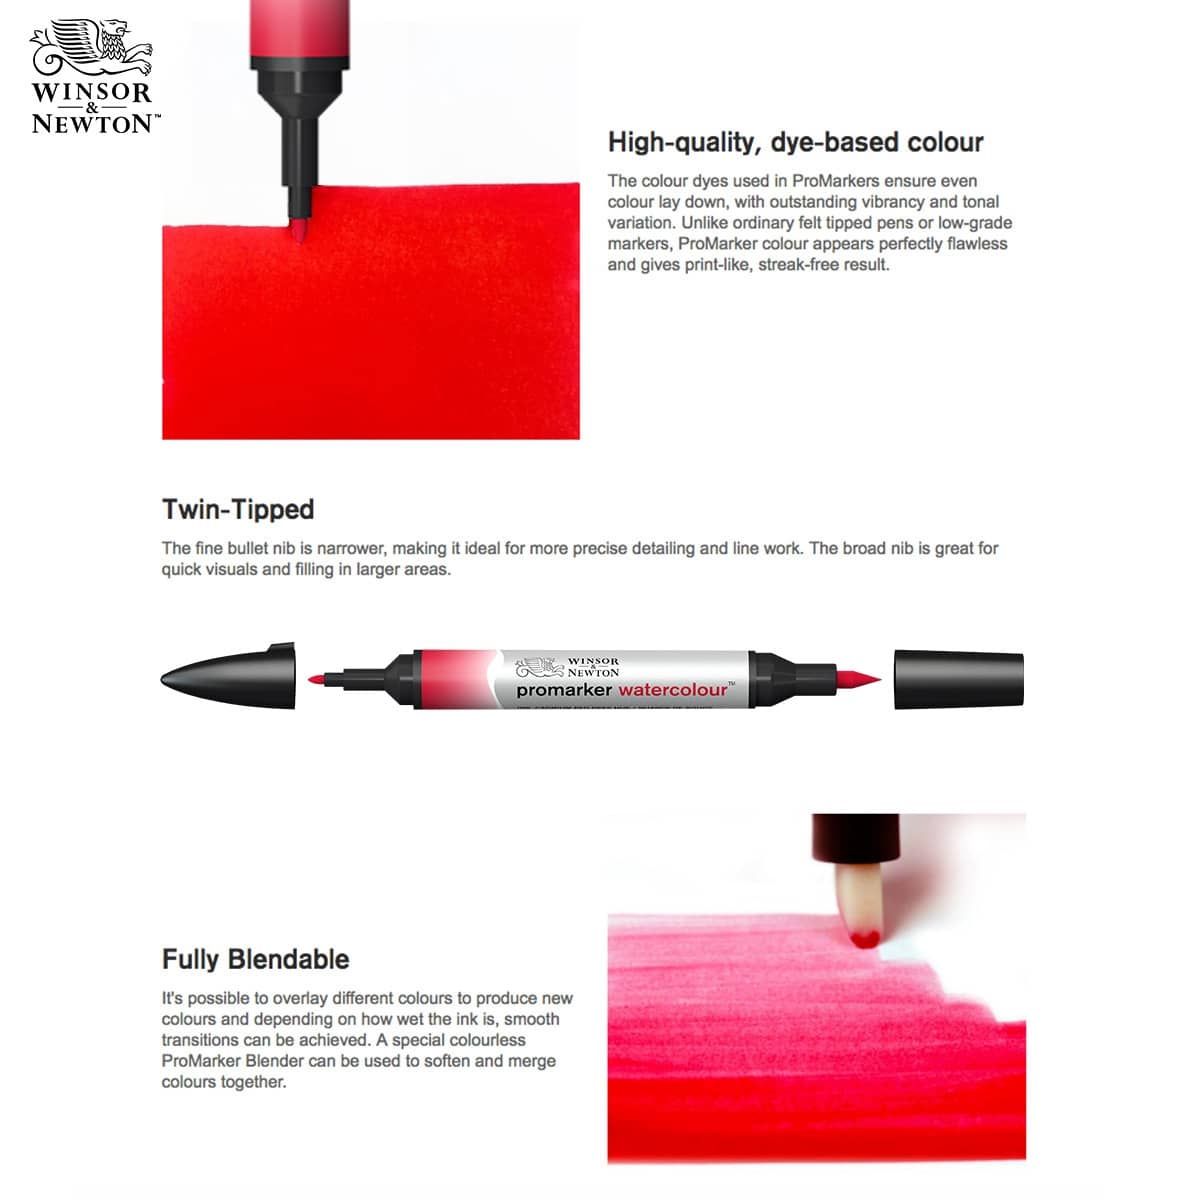  Winsor & Newton ProMarker Watercolor Marker’s are intermixable with Winsor & Newton Water Colours and mediums